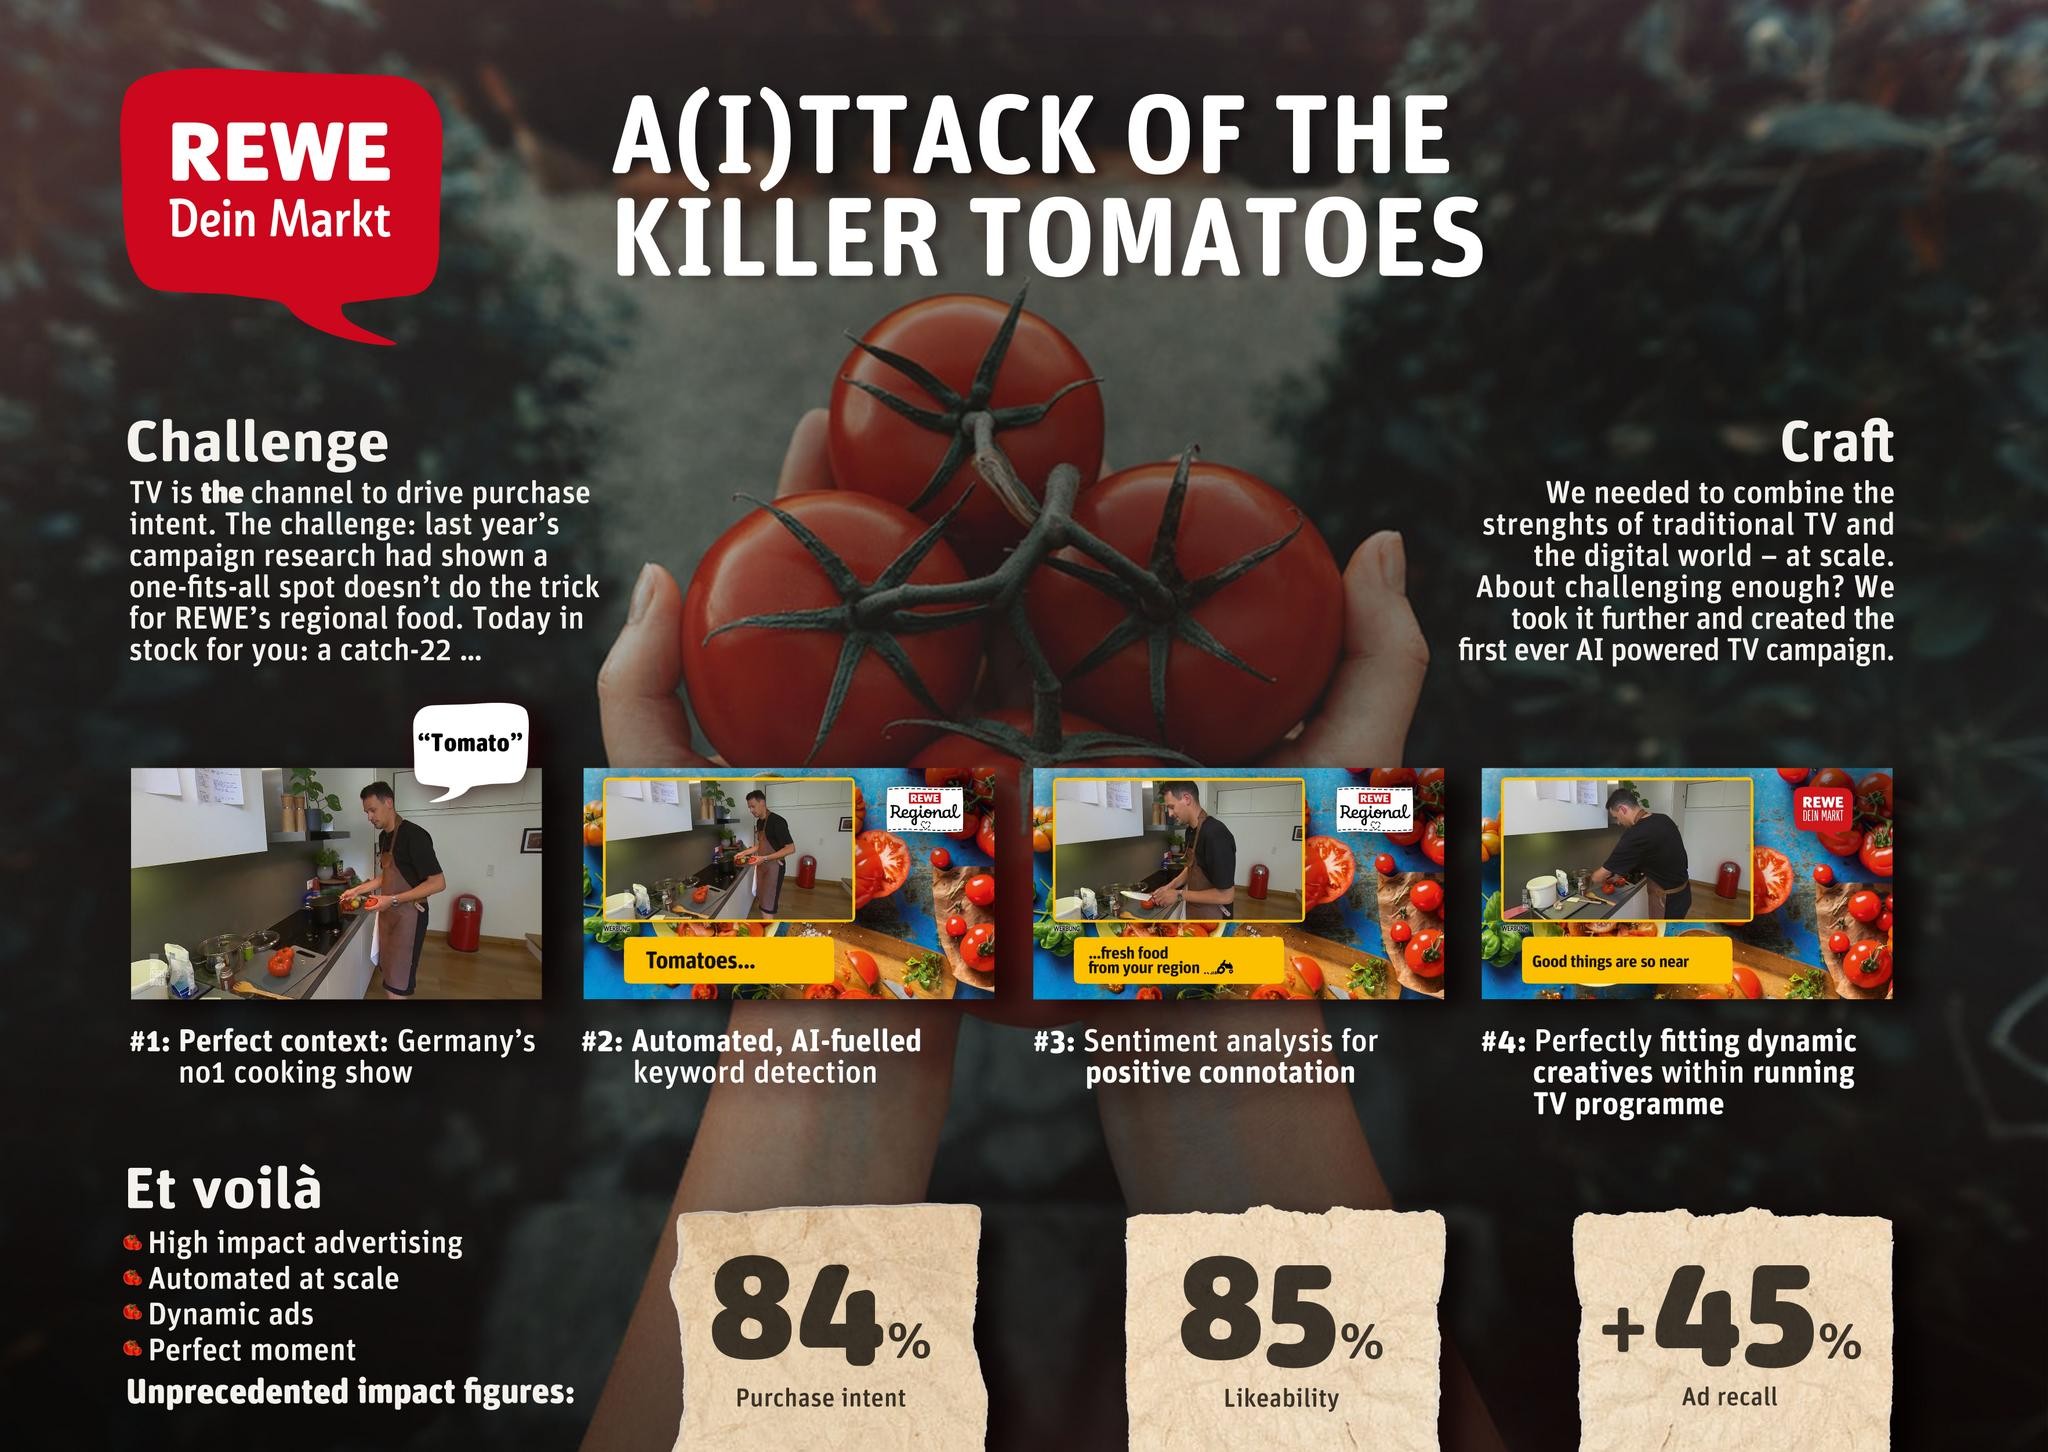 A(I)TTACK OF THE KILLER TOMATOES